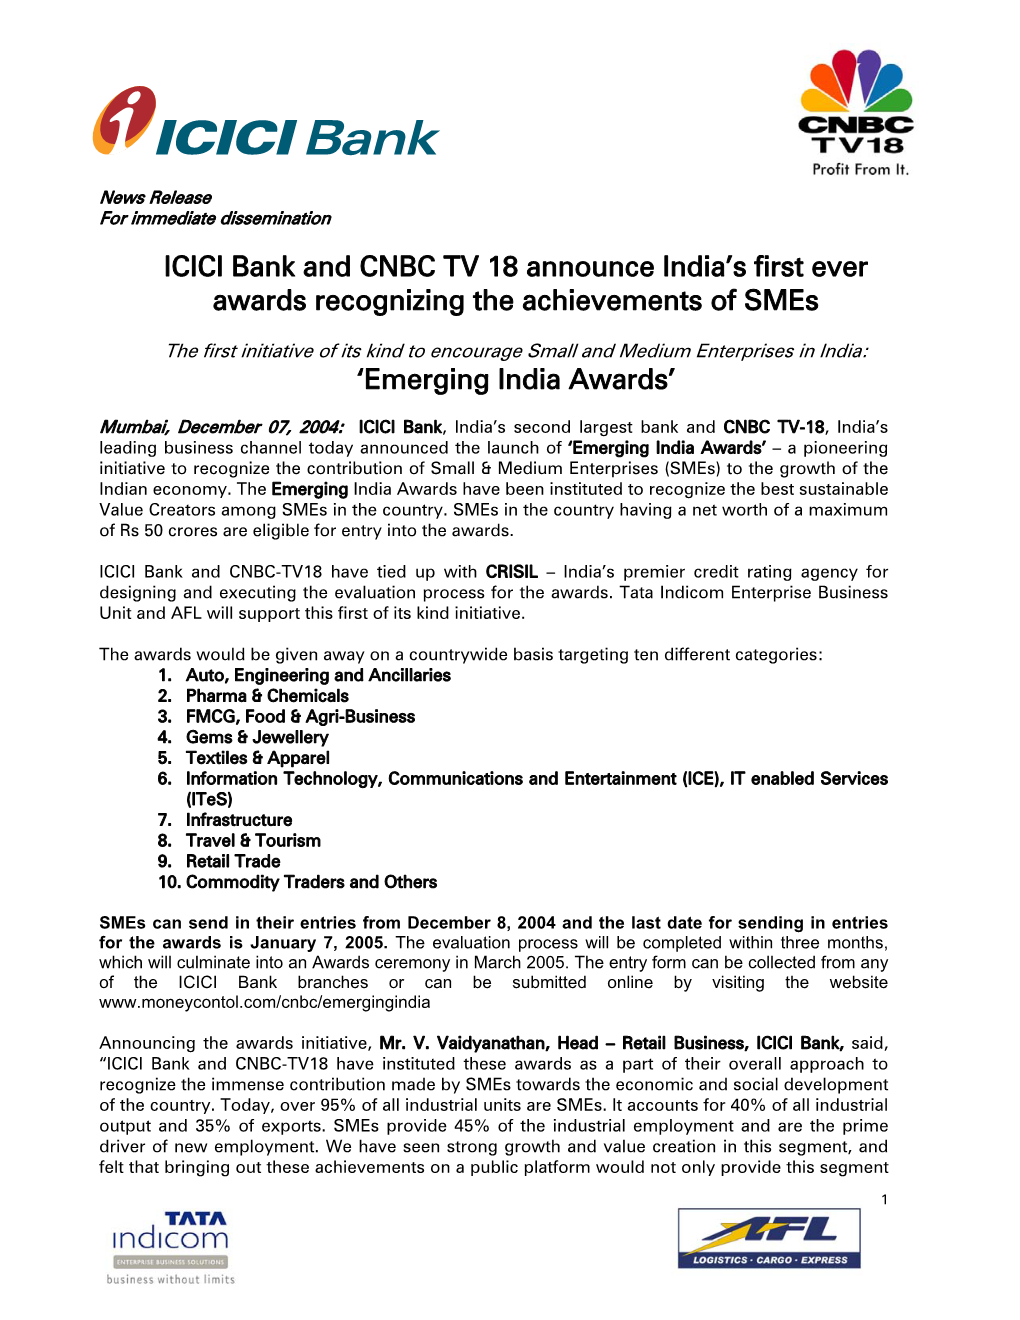 ICICI Bank and CNBC TV 18 Announce India's First Ever Awards